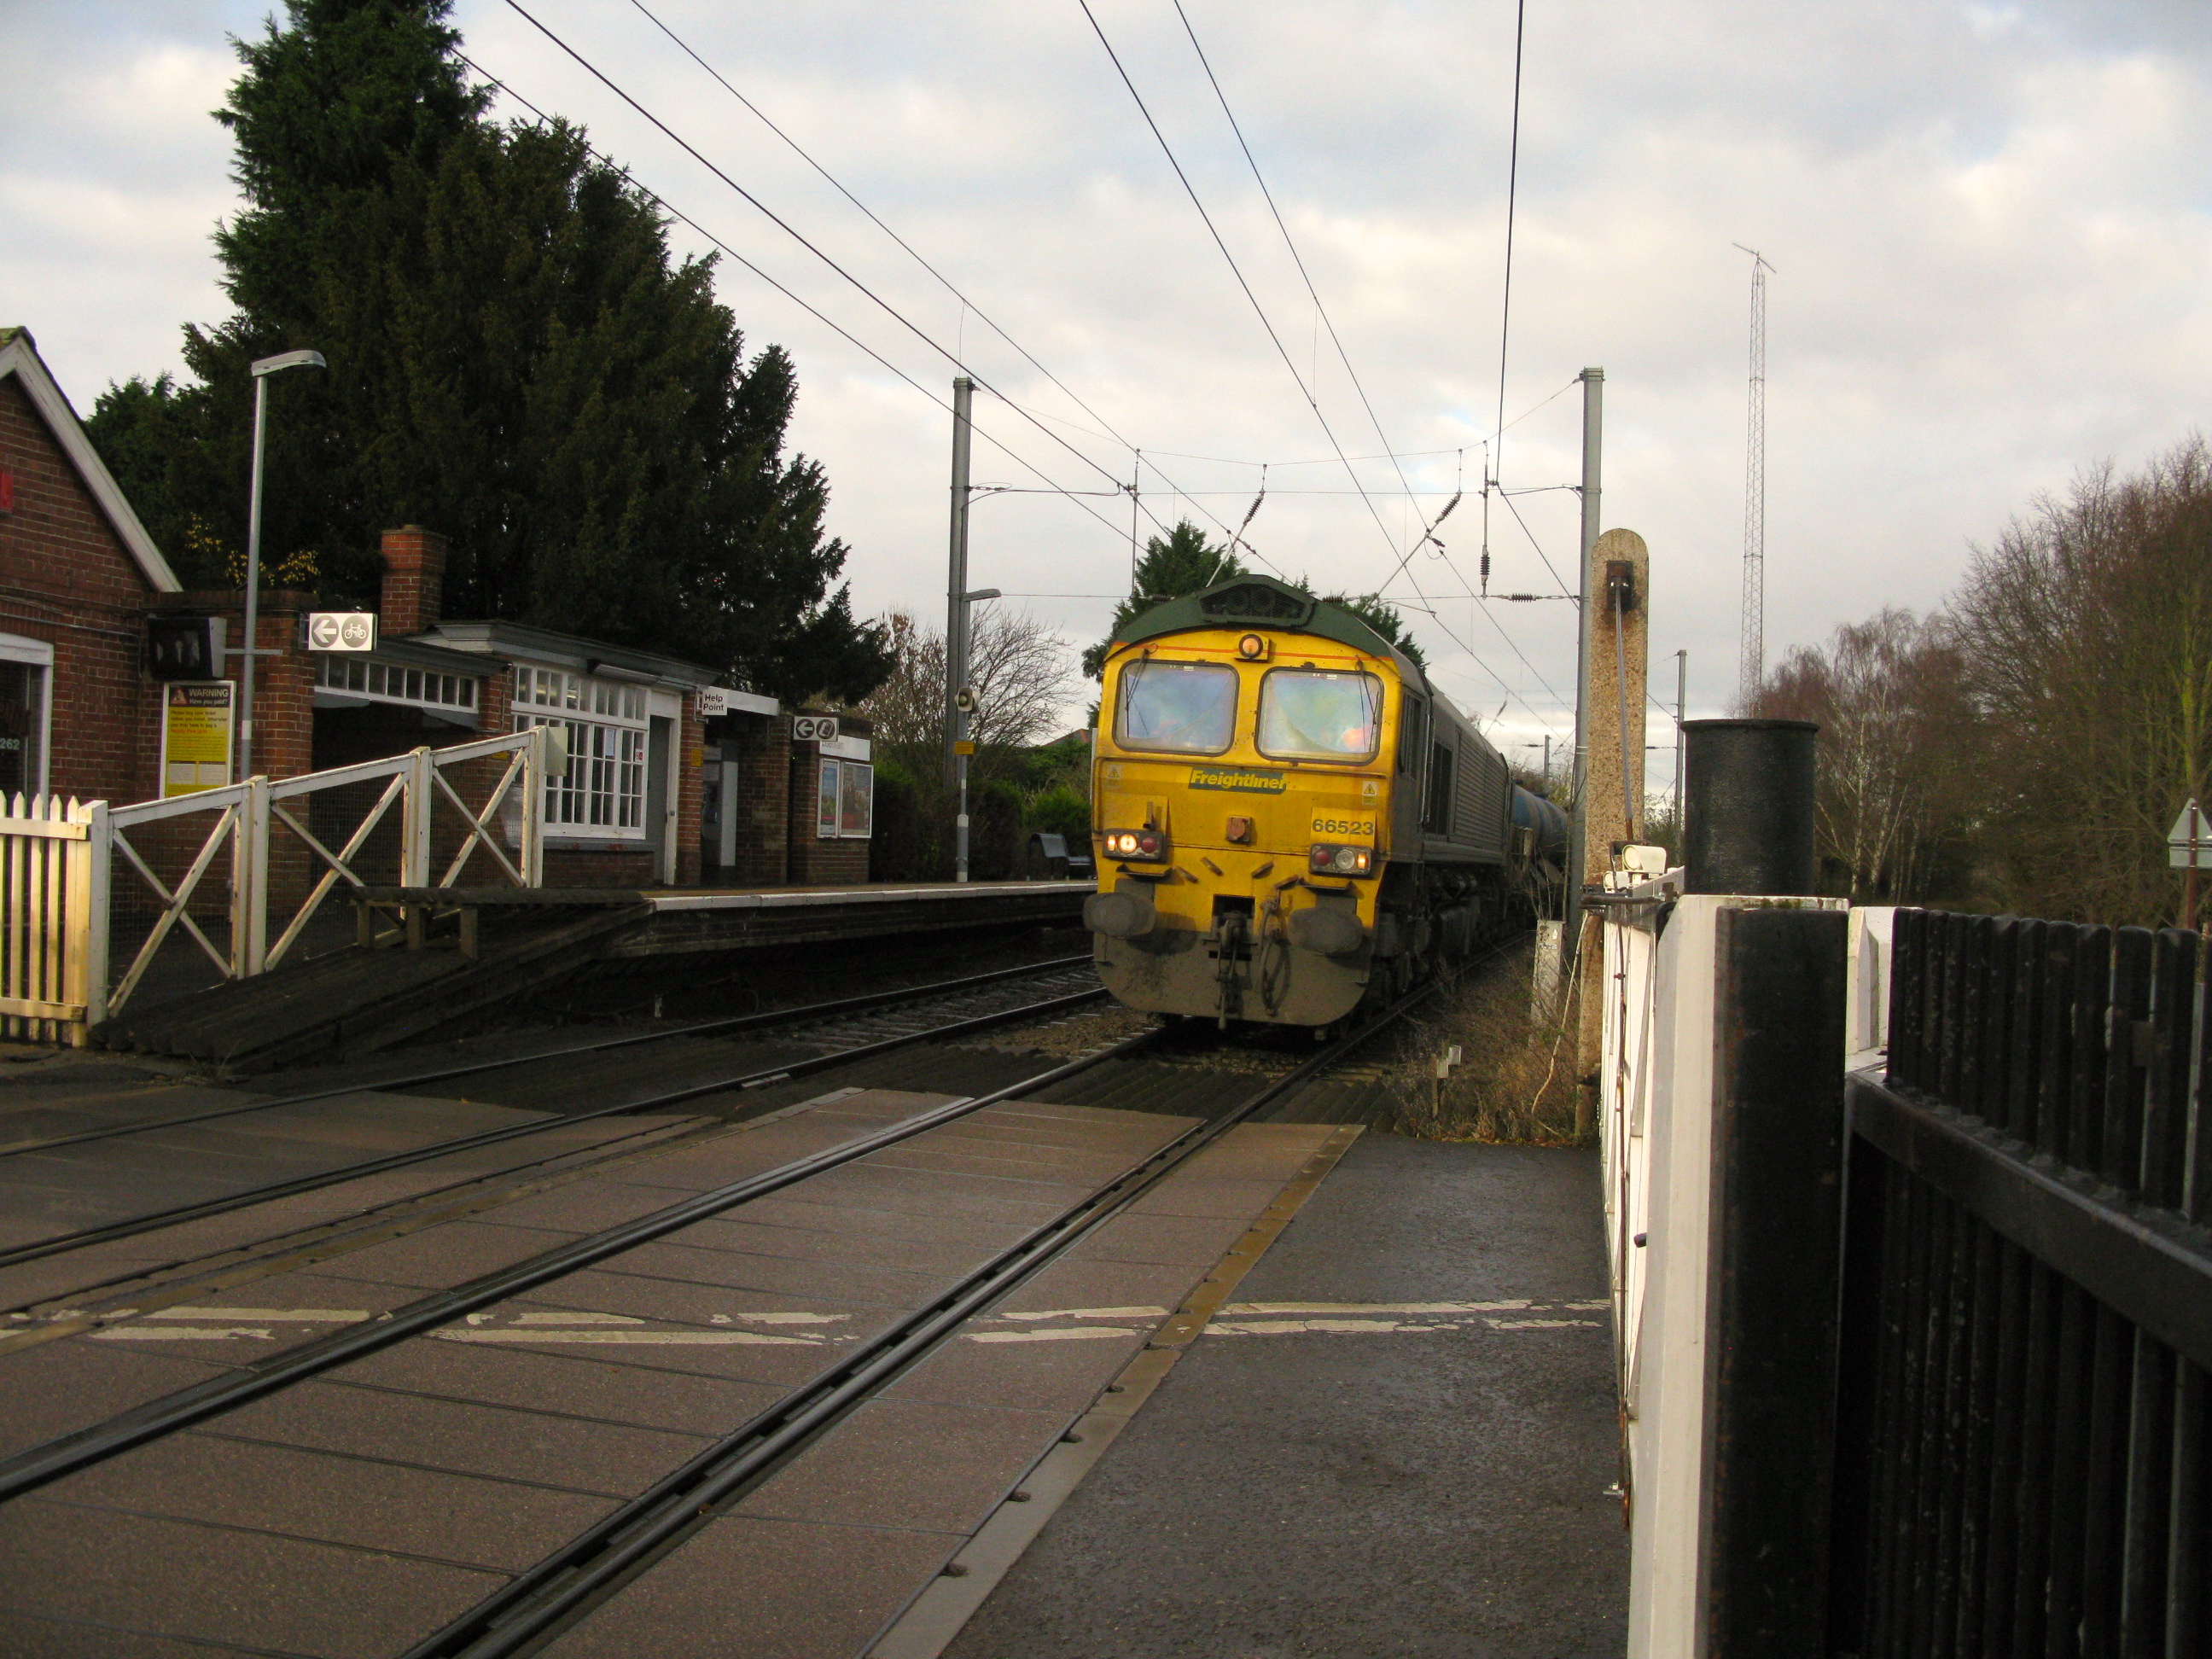 Freightliner 66523 less than a second from the Elsenham level crossings. Black Up side footpath gate on near right (Photo: © London Intelligence)